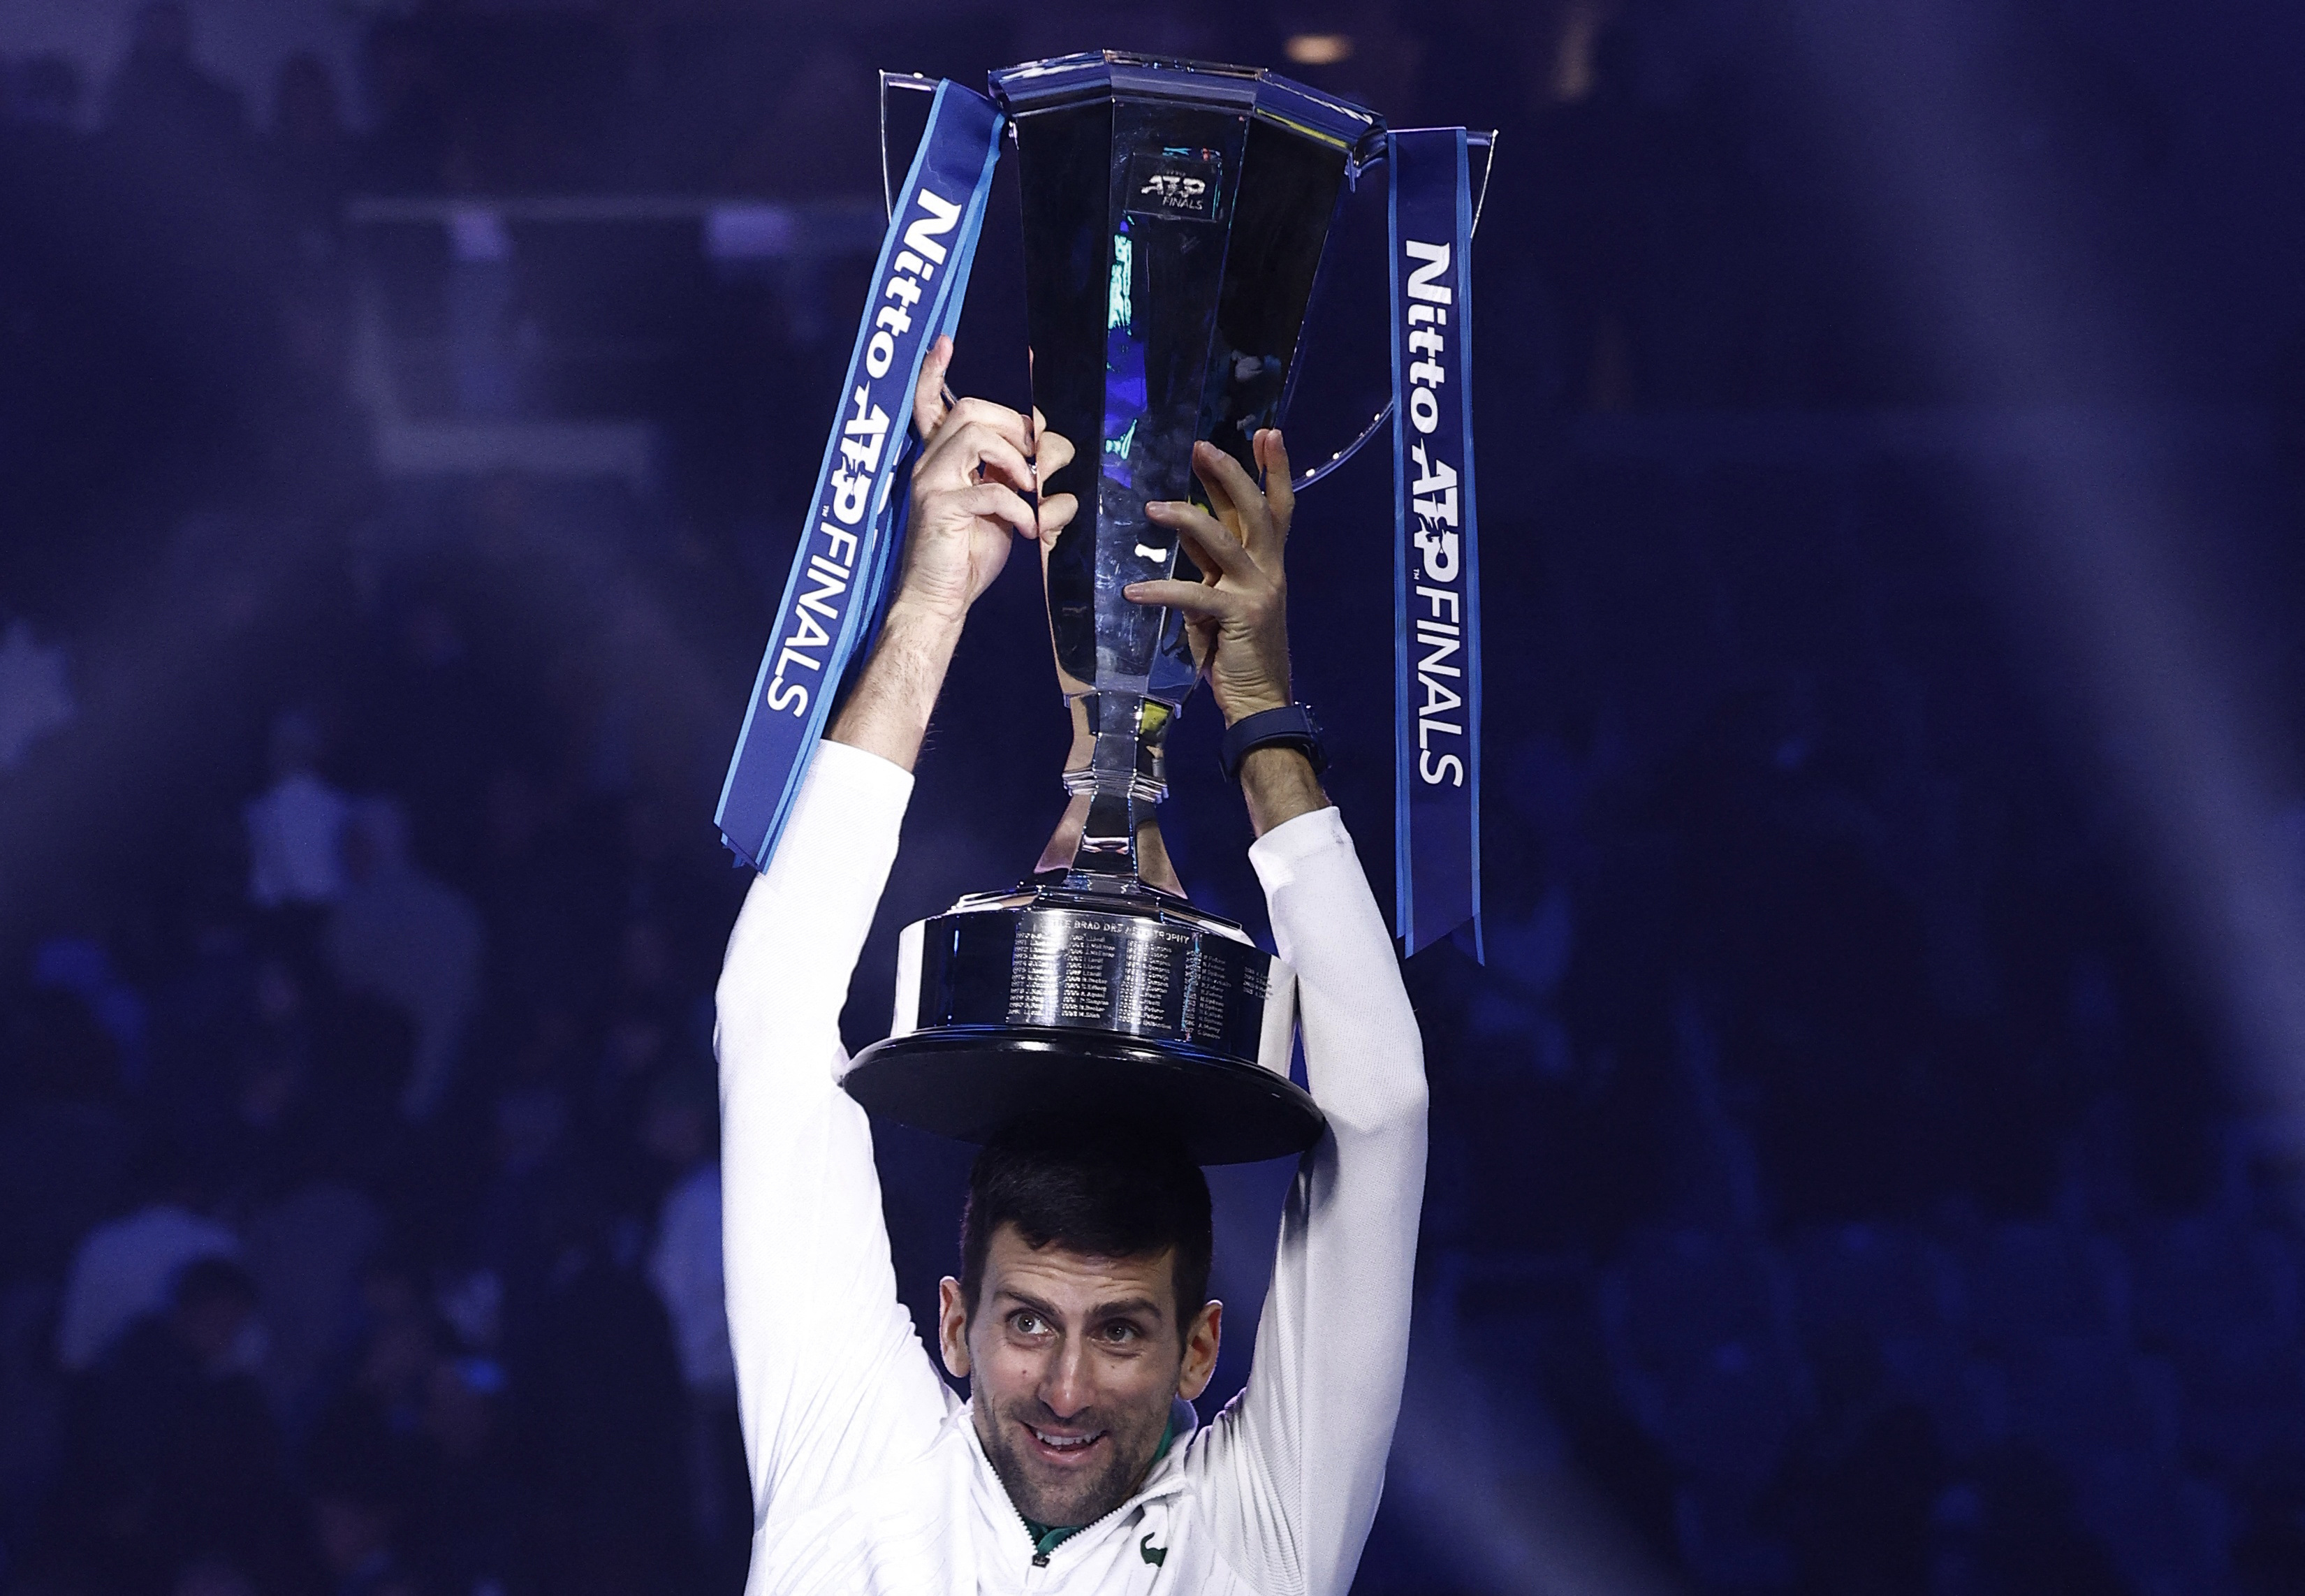 Tennis - ATP Finals Turin - Pala Alpitour, Turin, Italy - November 20, 2022 Serbia's Novak Djokovic celebrates with the trophy after winning the men's singles final against Norway's Casper Ruud.